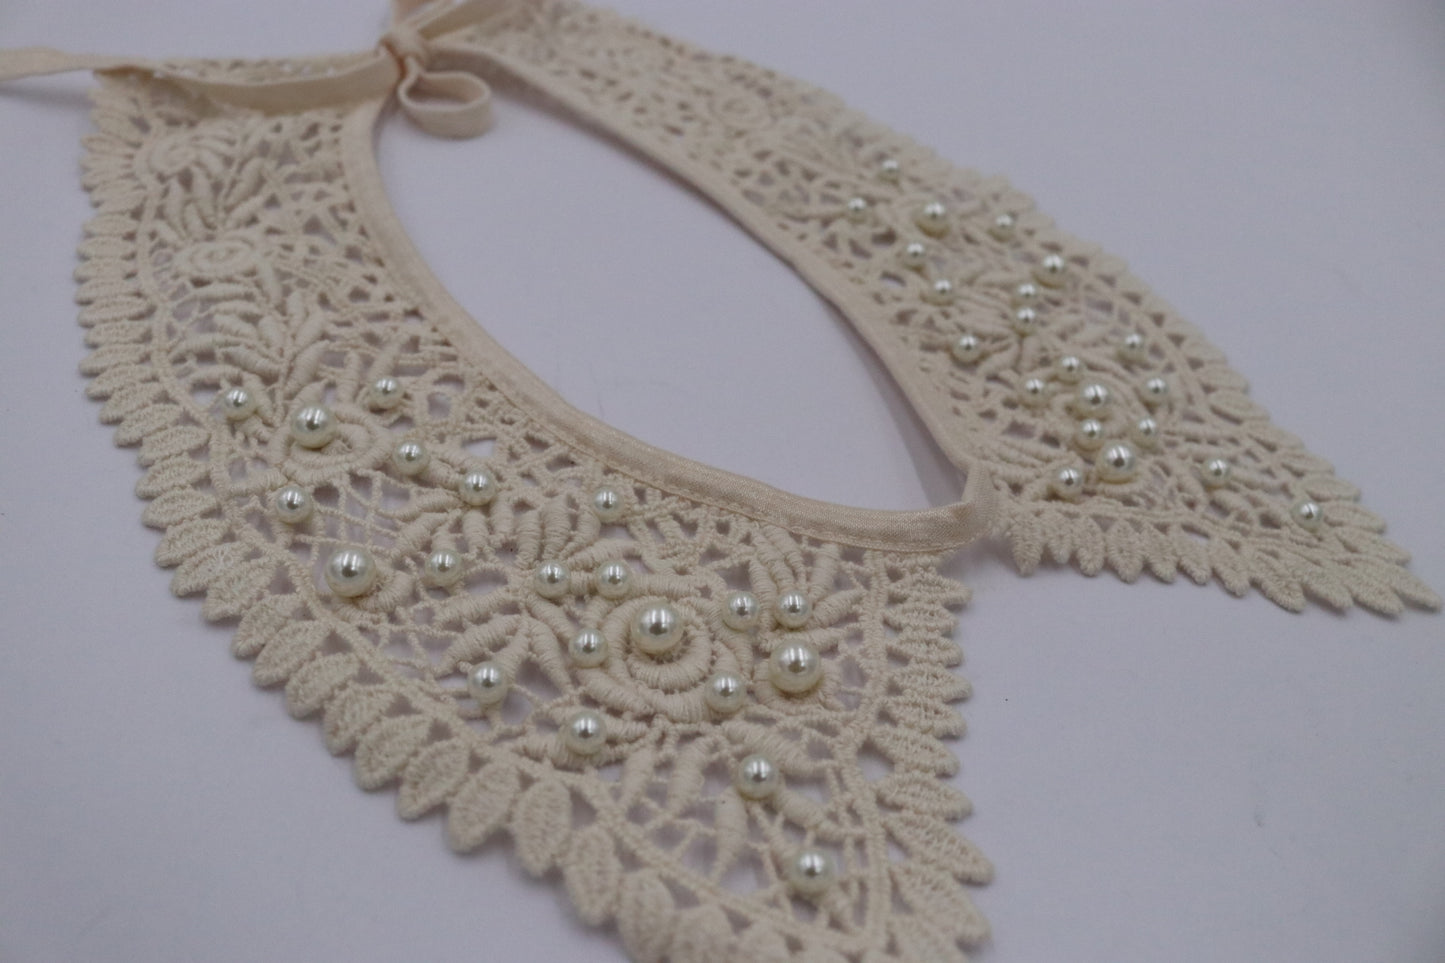 Beaded Lace Collar Necklace